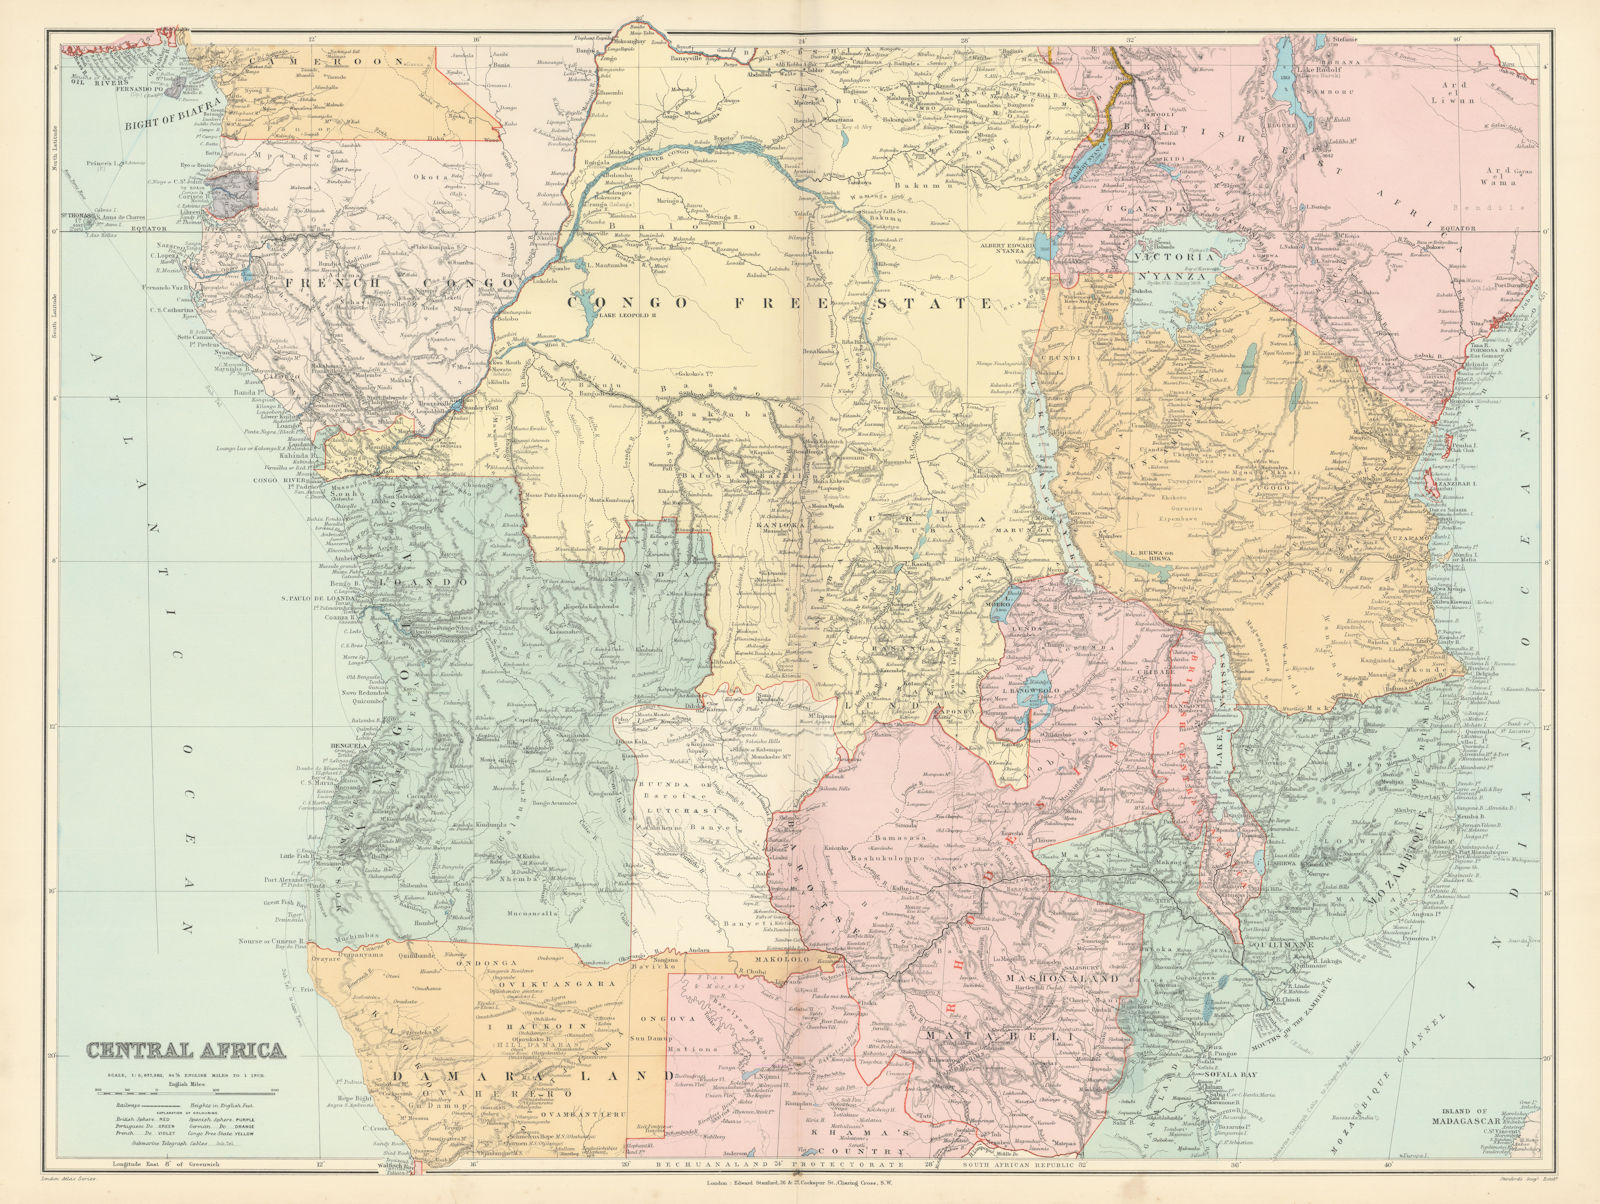 Central Africa. Congo Free State Rhodesia German East Africa. STANFORD 1896 map